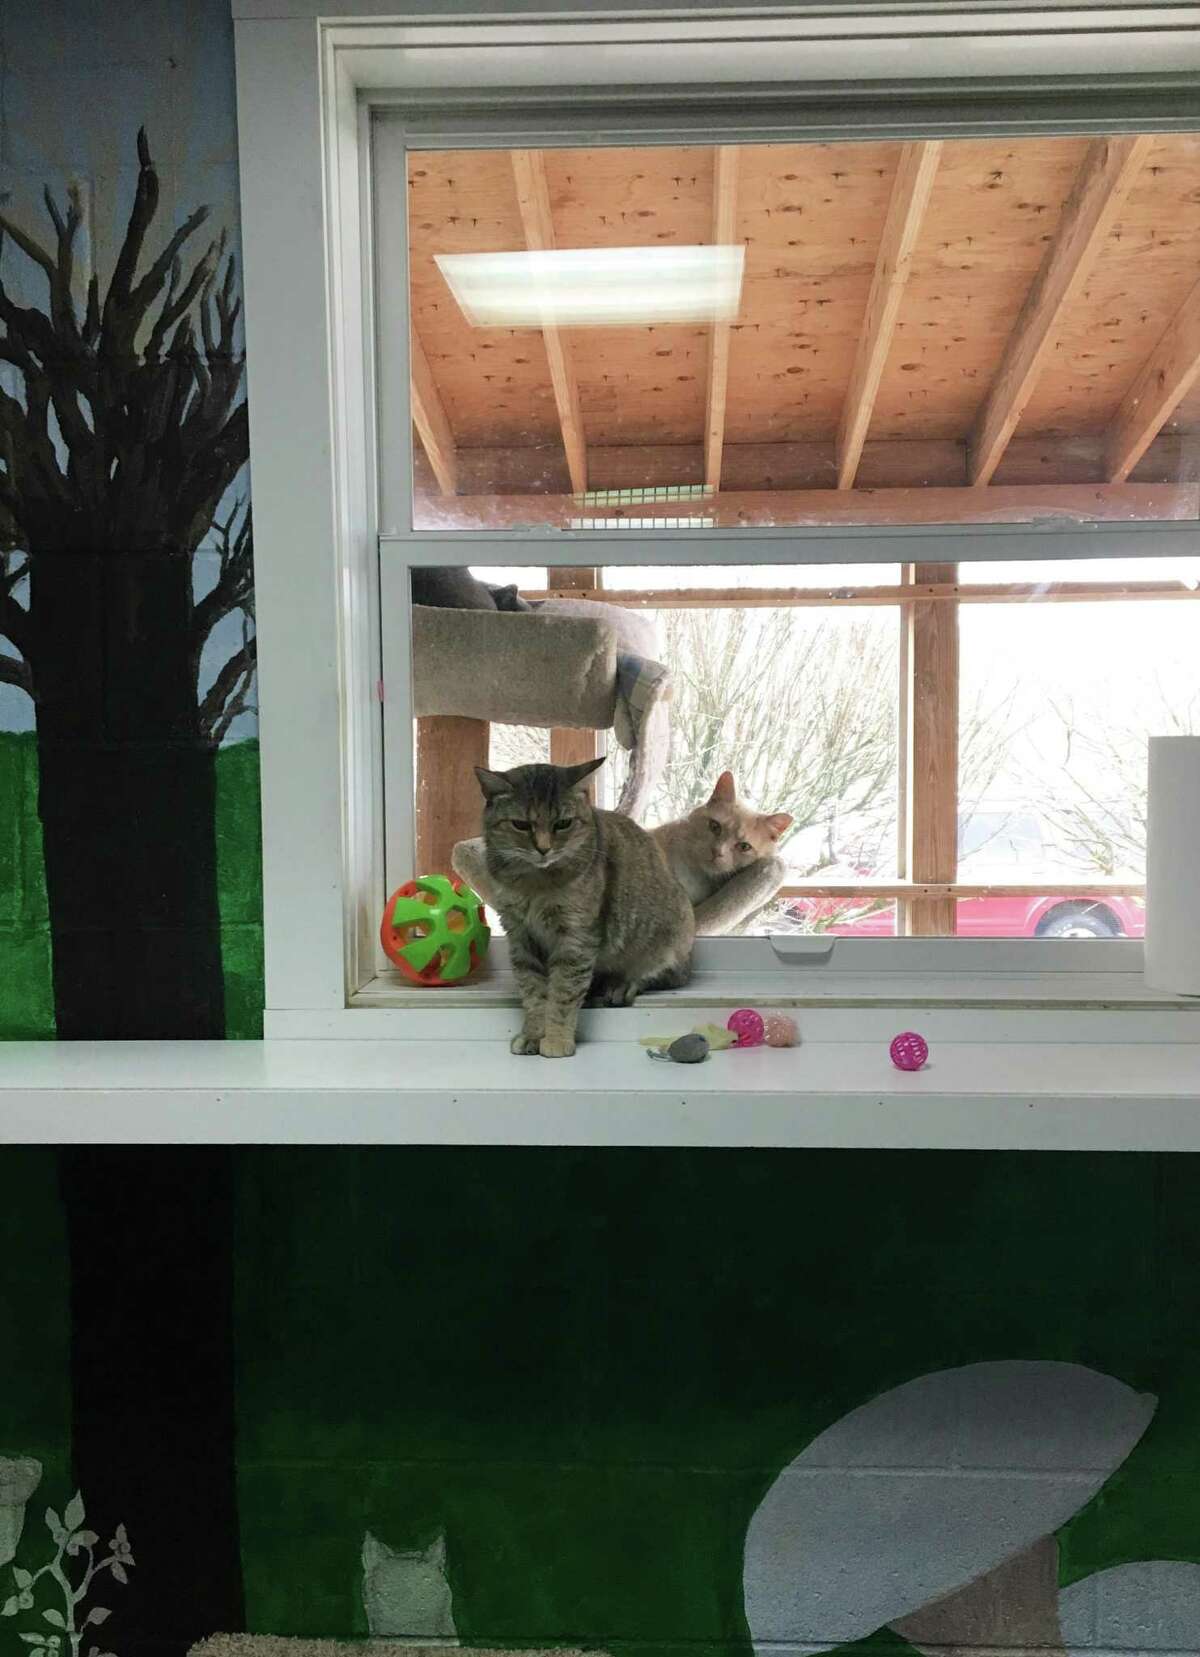 Two cats lounge in the indoor/outside room at the New Milford Animal Welfare Society shelter. The shelter is going to be renovated and expanded, adding 1,300 square feet of space. Friday, March 15, 2019.